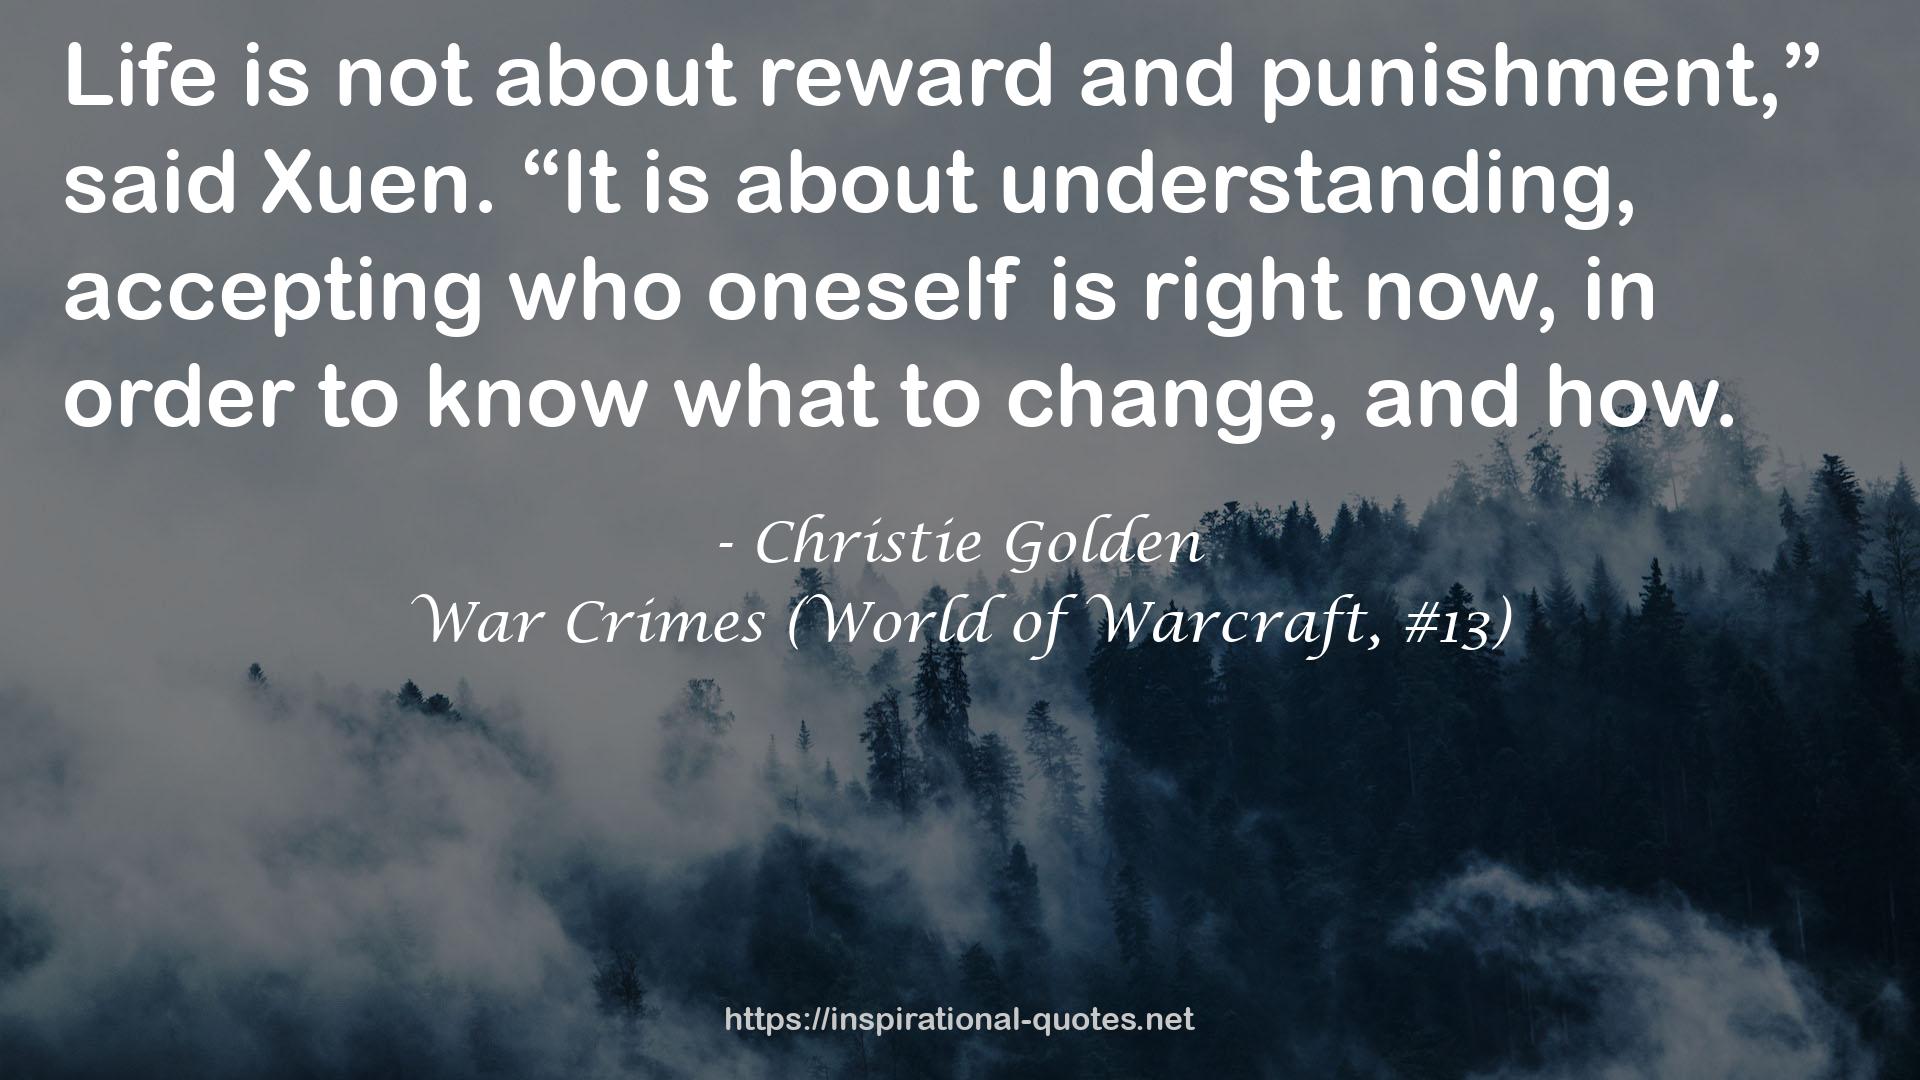 War Crimes (World of Warcraft, #13) QUOTES